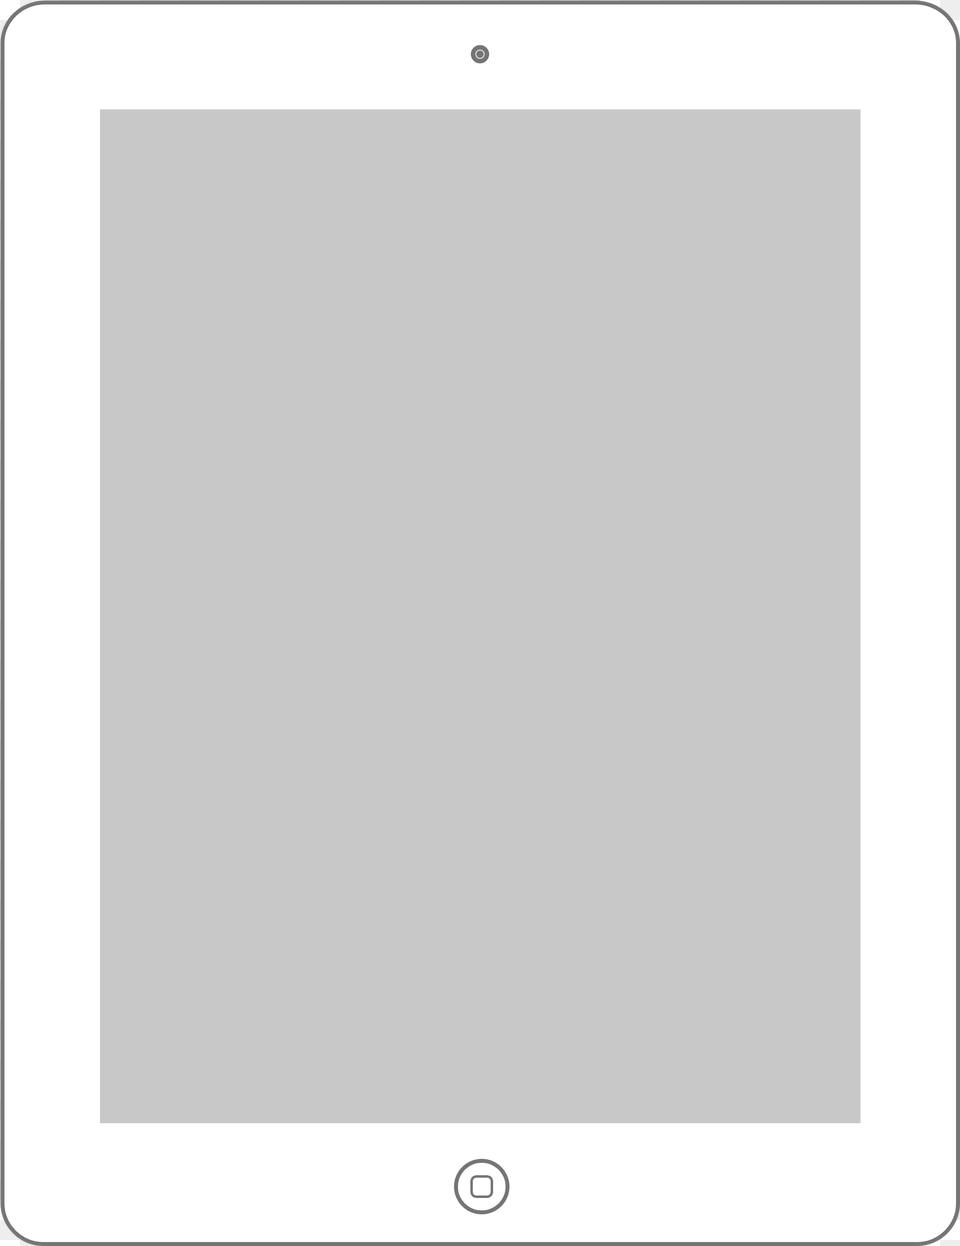 Clip Art Apple Products Minimal Wireframe Ipad Minimal, Page, Text, Electronics, White Board Png